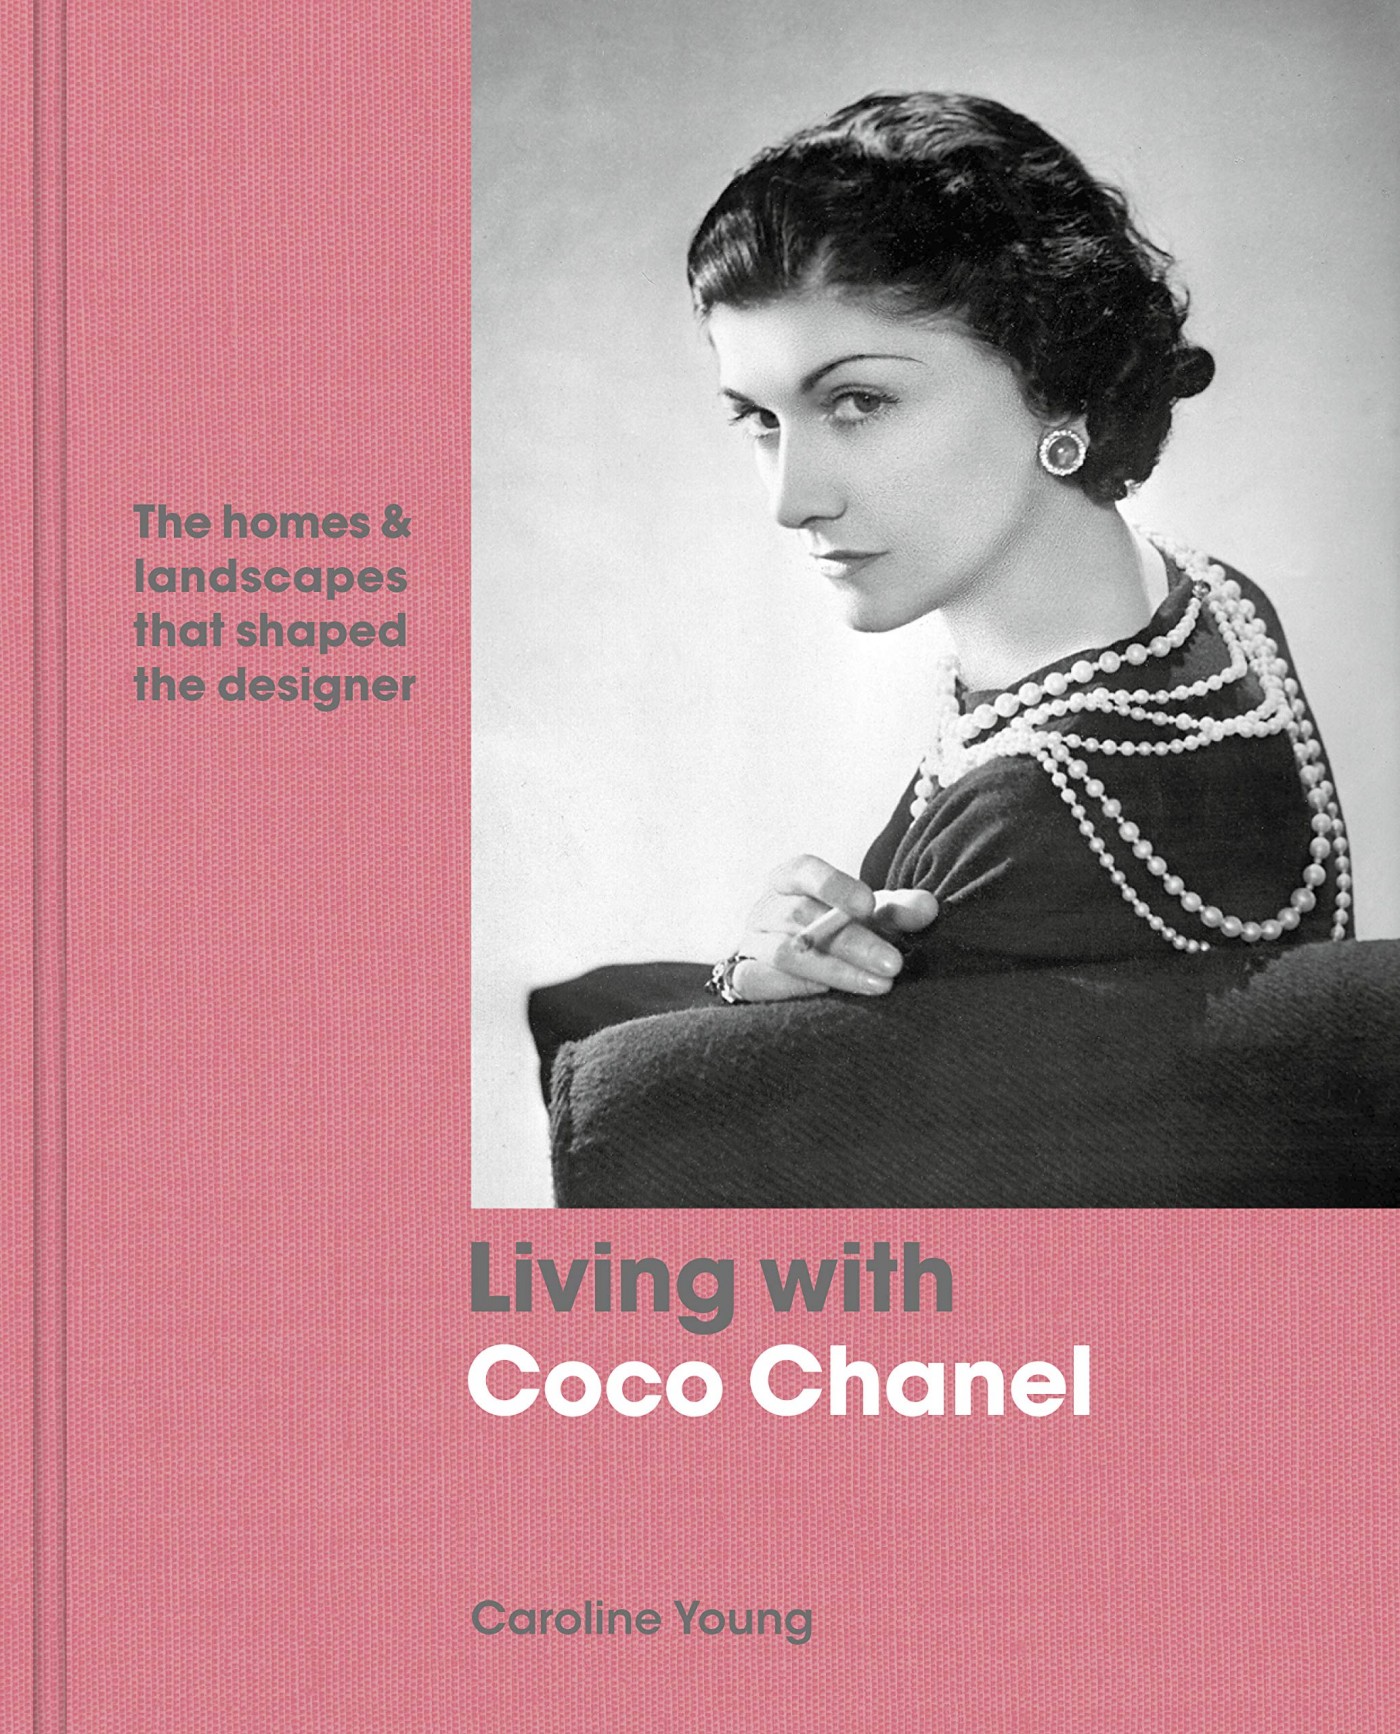 Cover of Caroline J. Young's 'Living with Coco Chanel' 